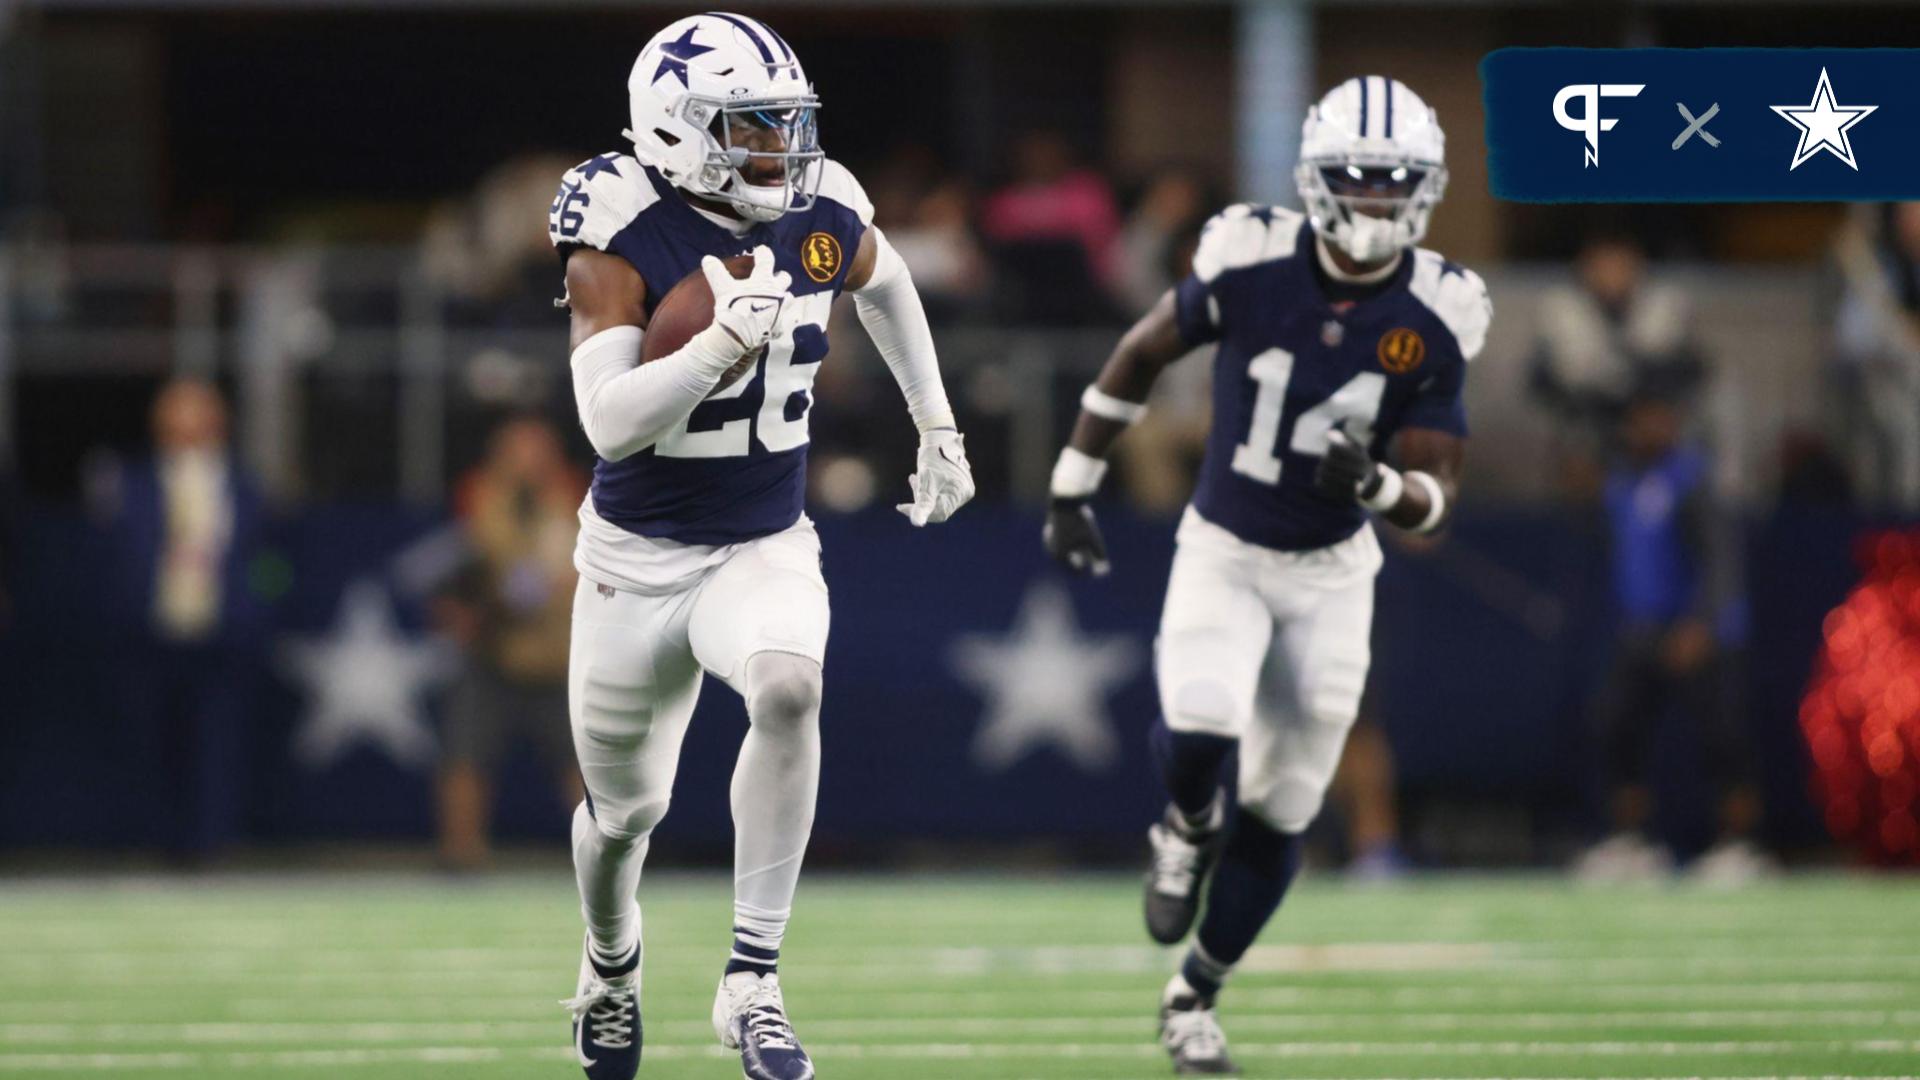 Dallas Cowboys cornerback DaRon Bland (26) returns an interception for a touchdown in the fourth quarter against the Washington Commanders at AT&T Stadium.